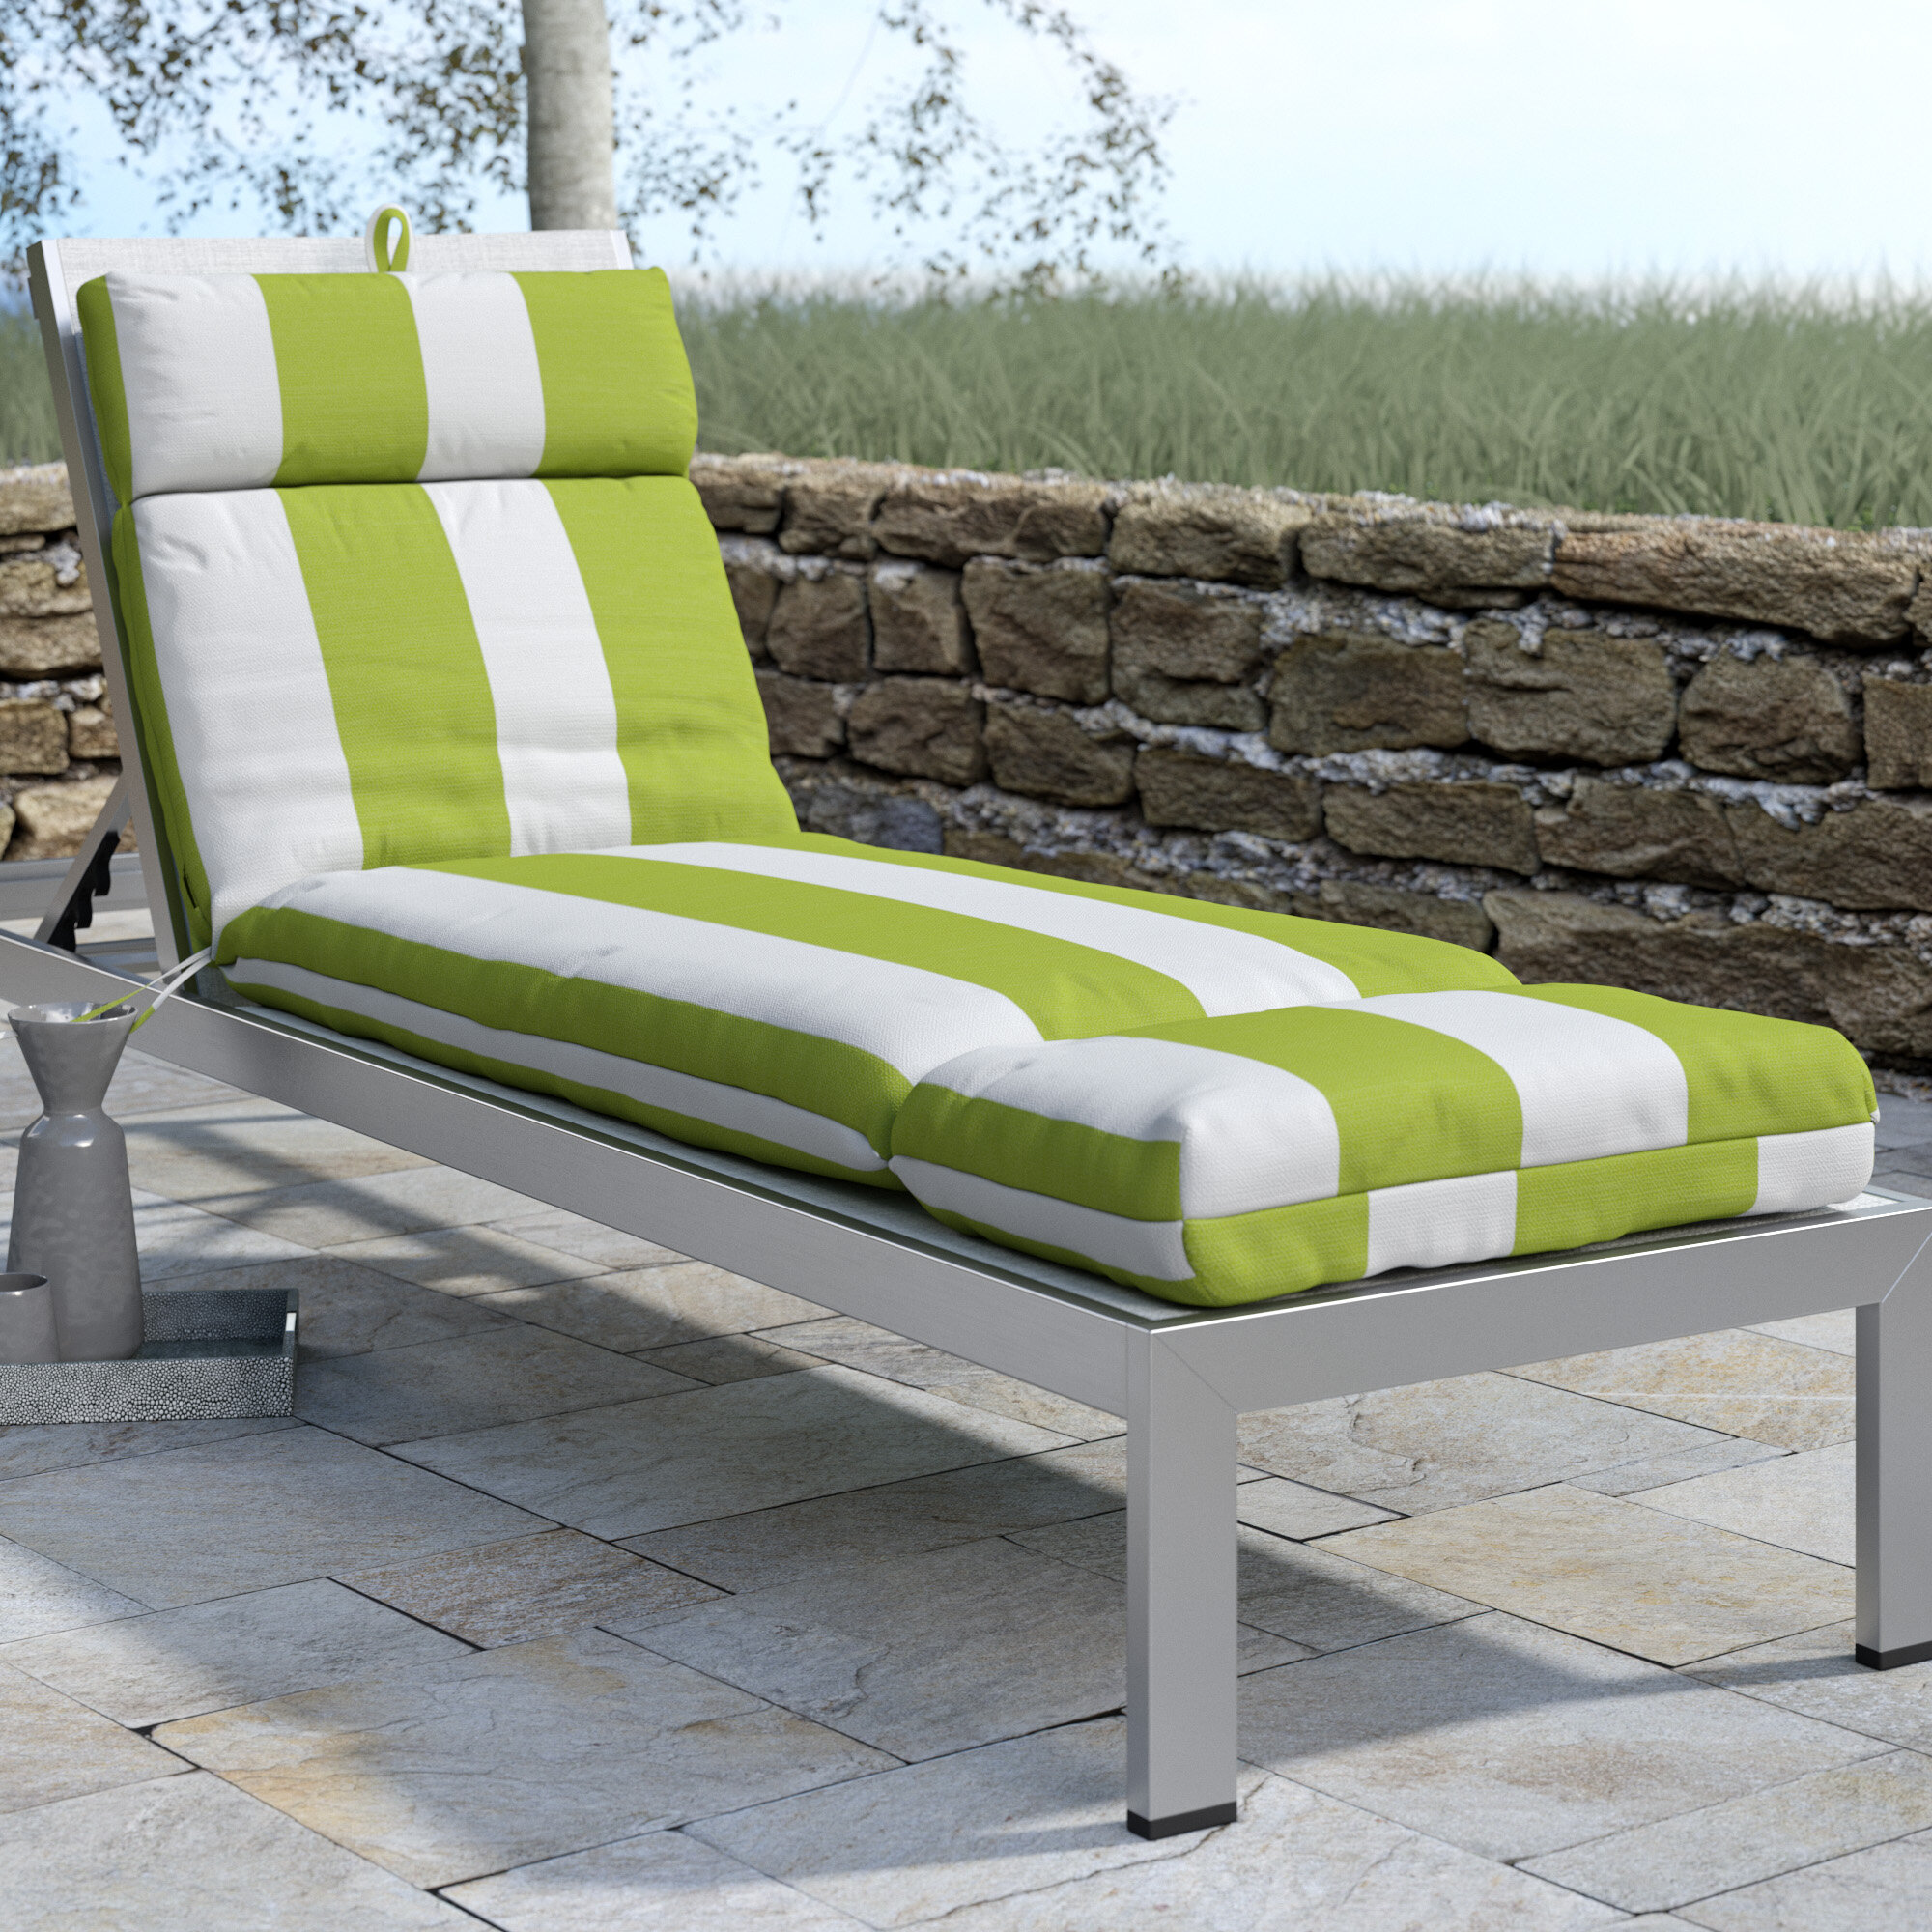 outdoor chaise lounge cushions